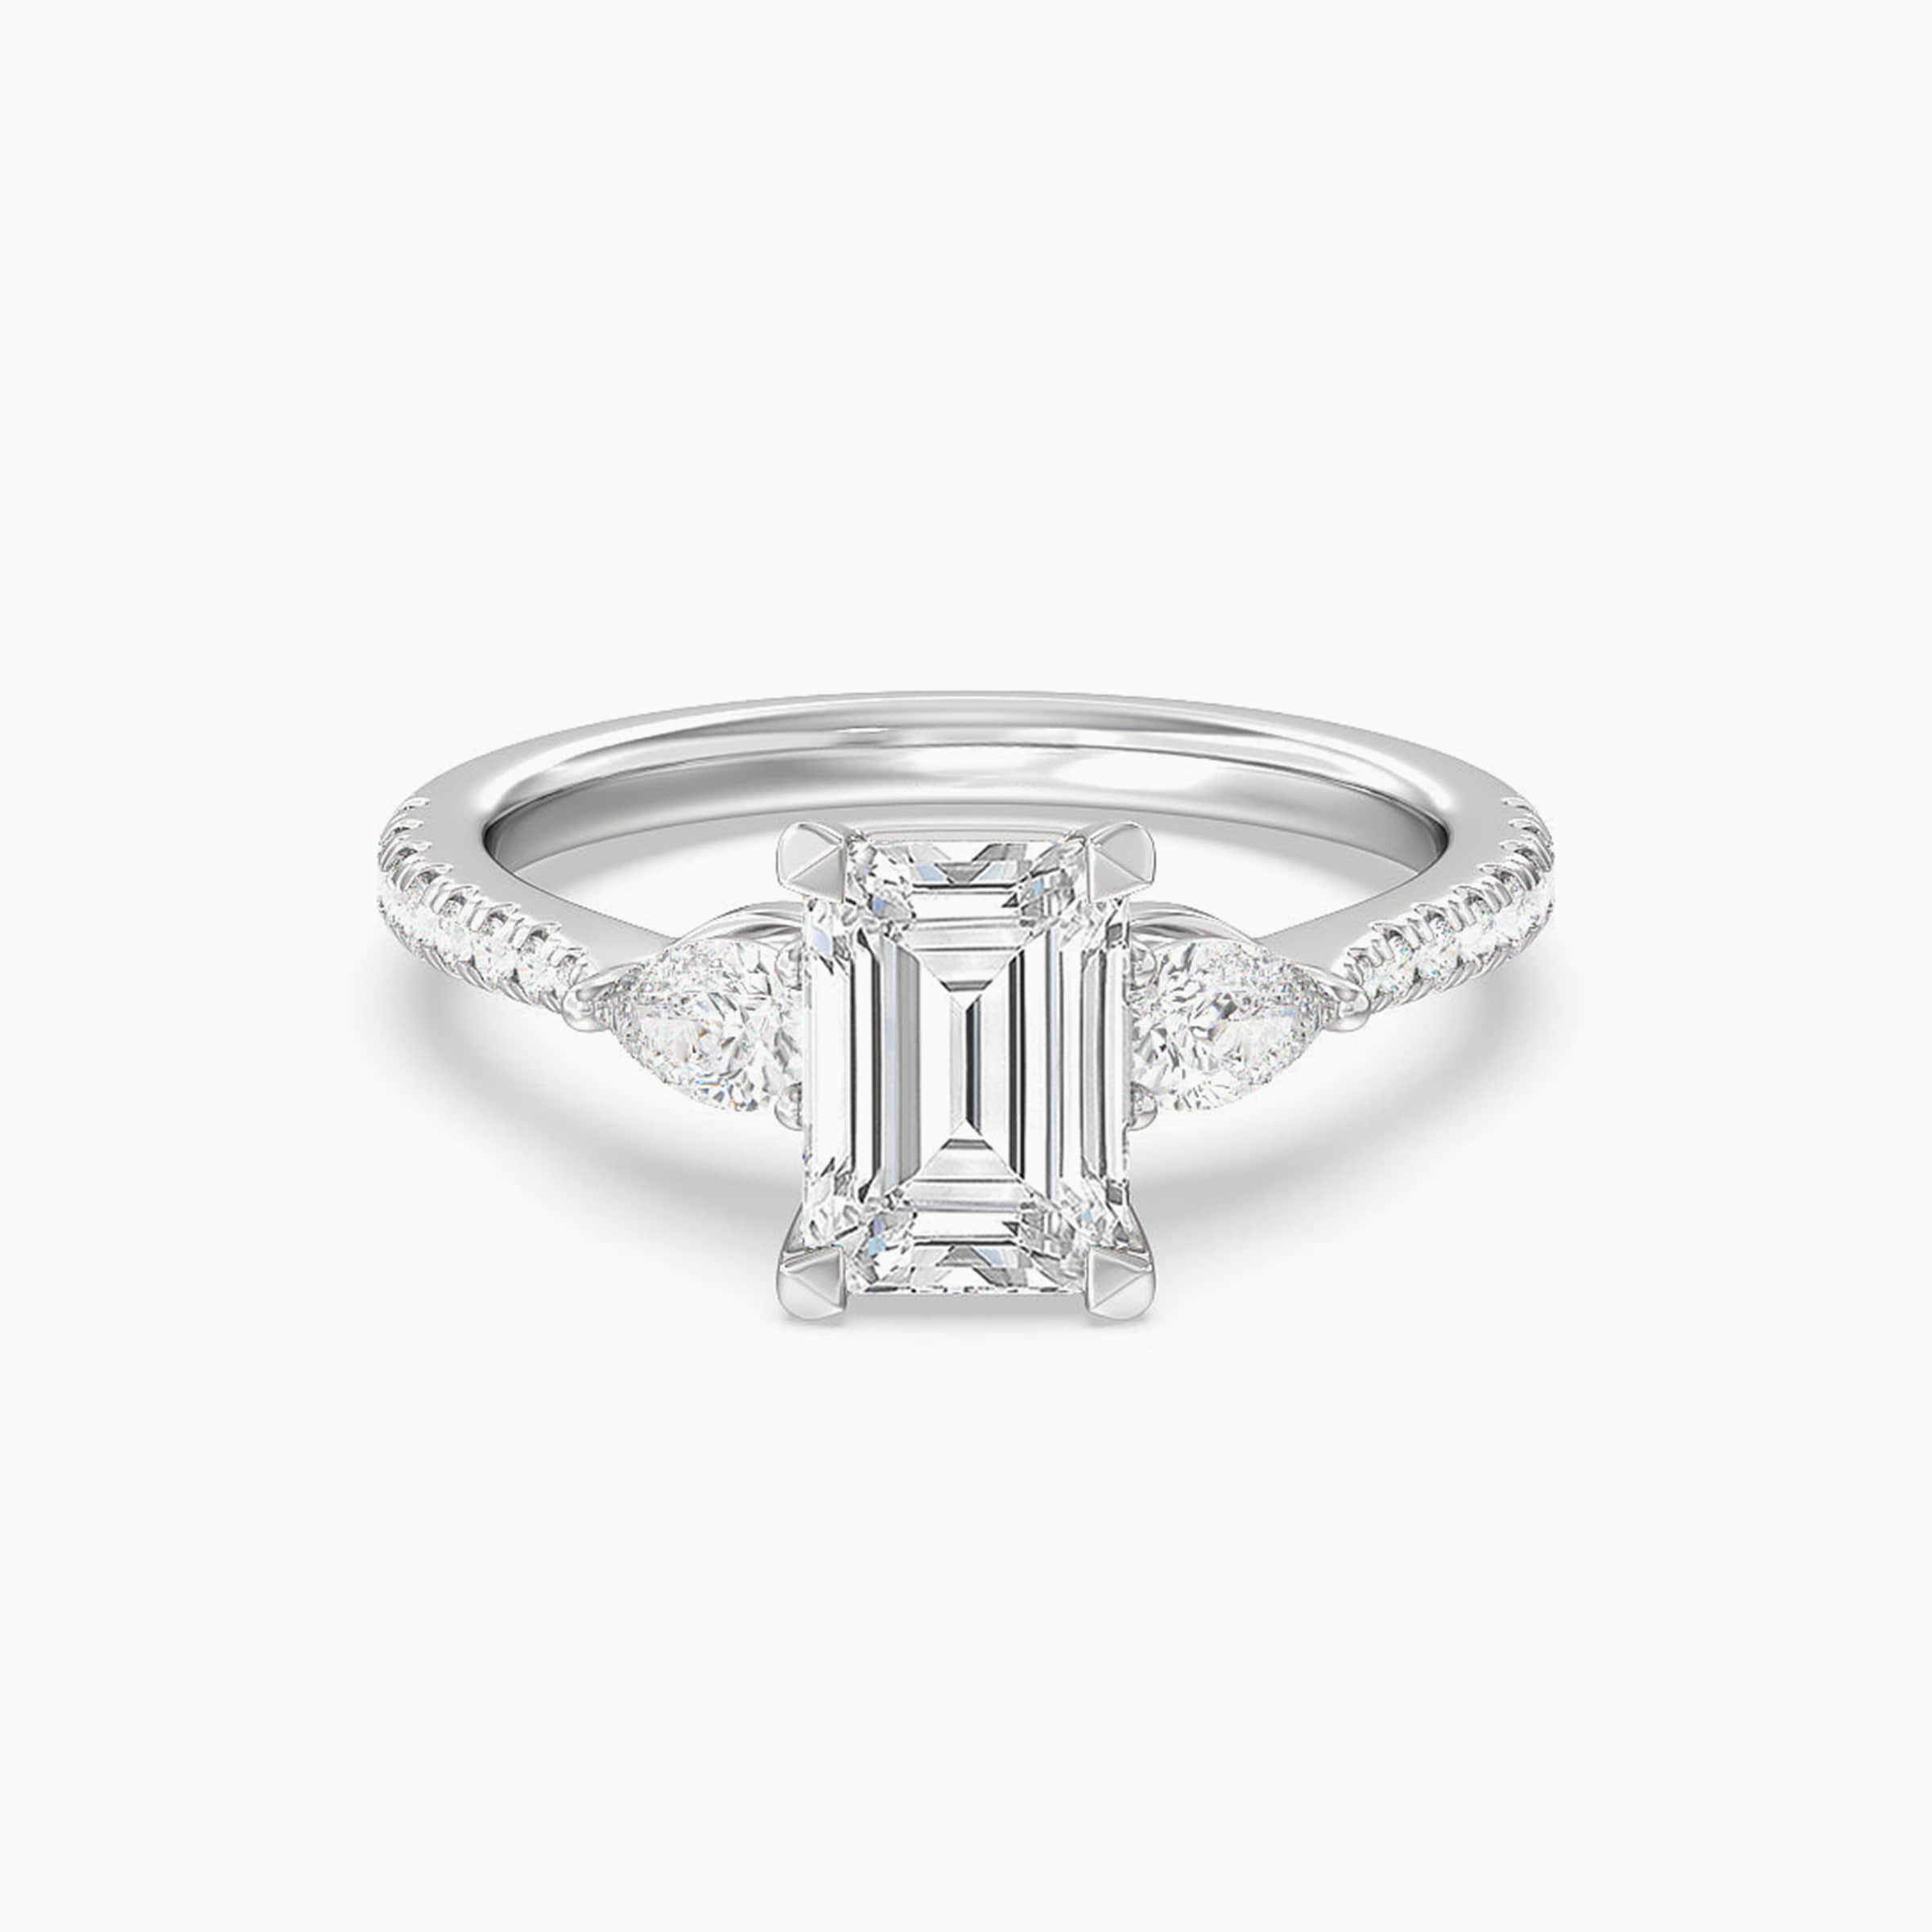 Darry Ring three stone engagement ring white gold